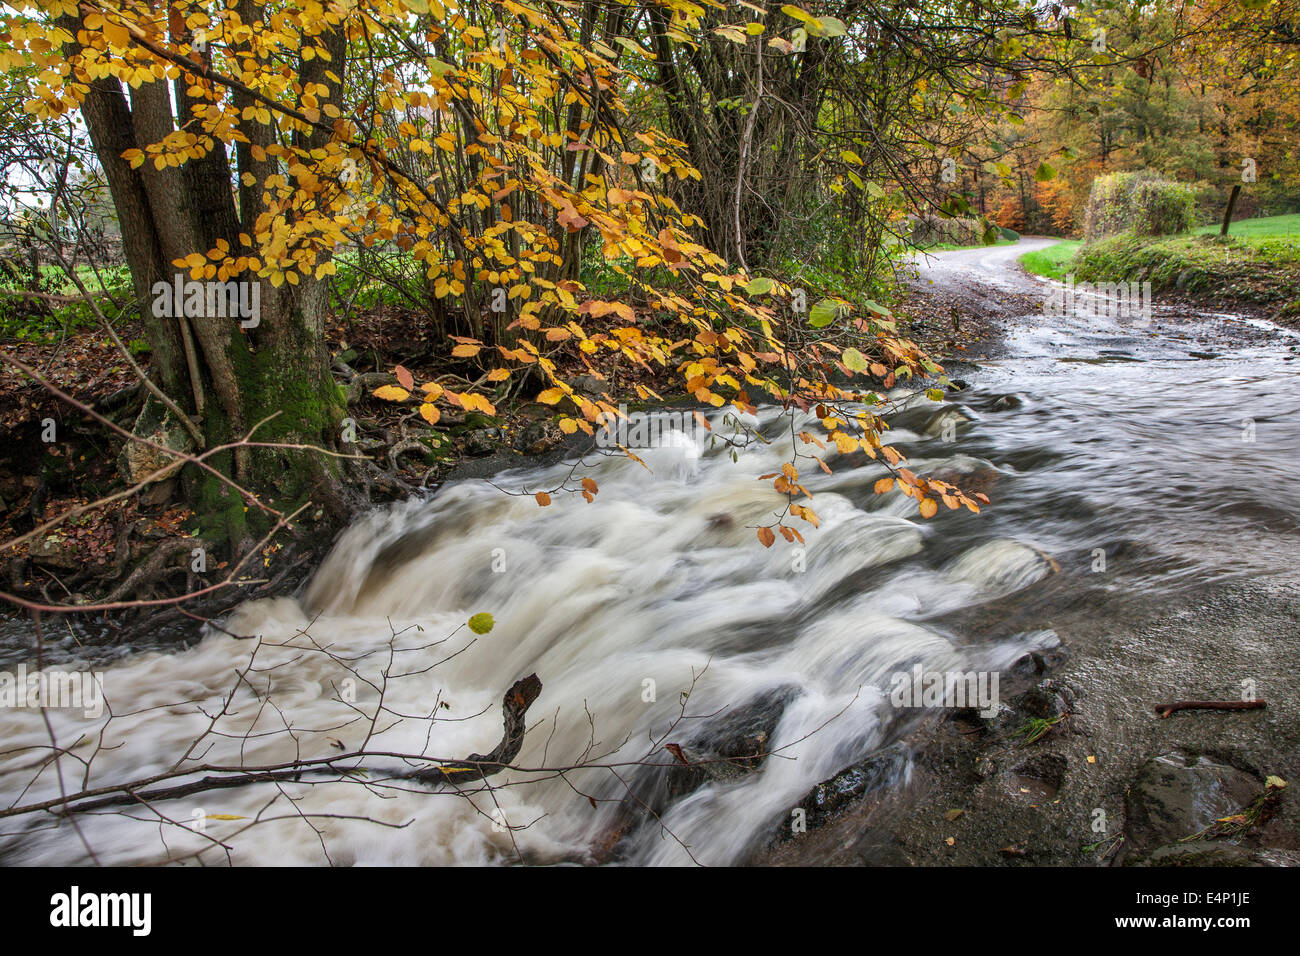 Ford in the Wayai, stream in the Belgian Ardennes, Belgium Stock Photo